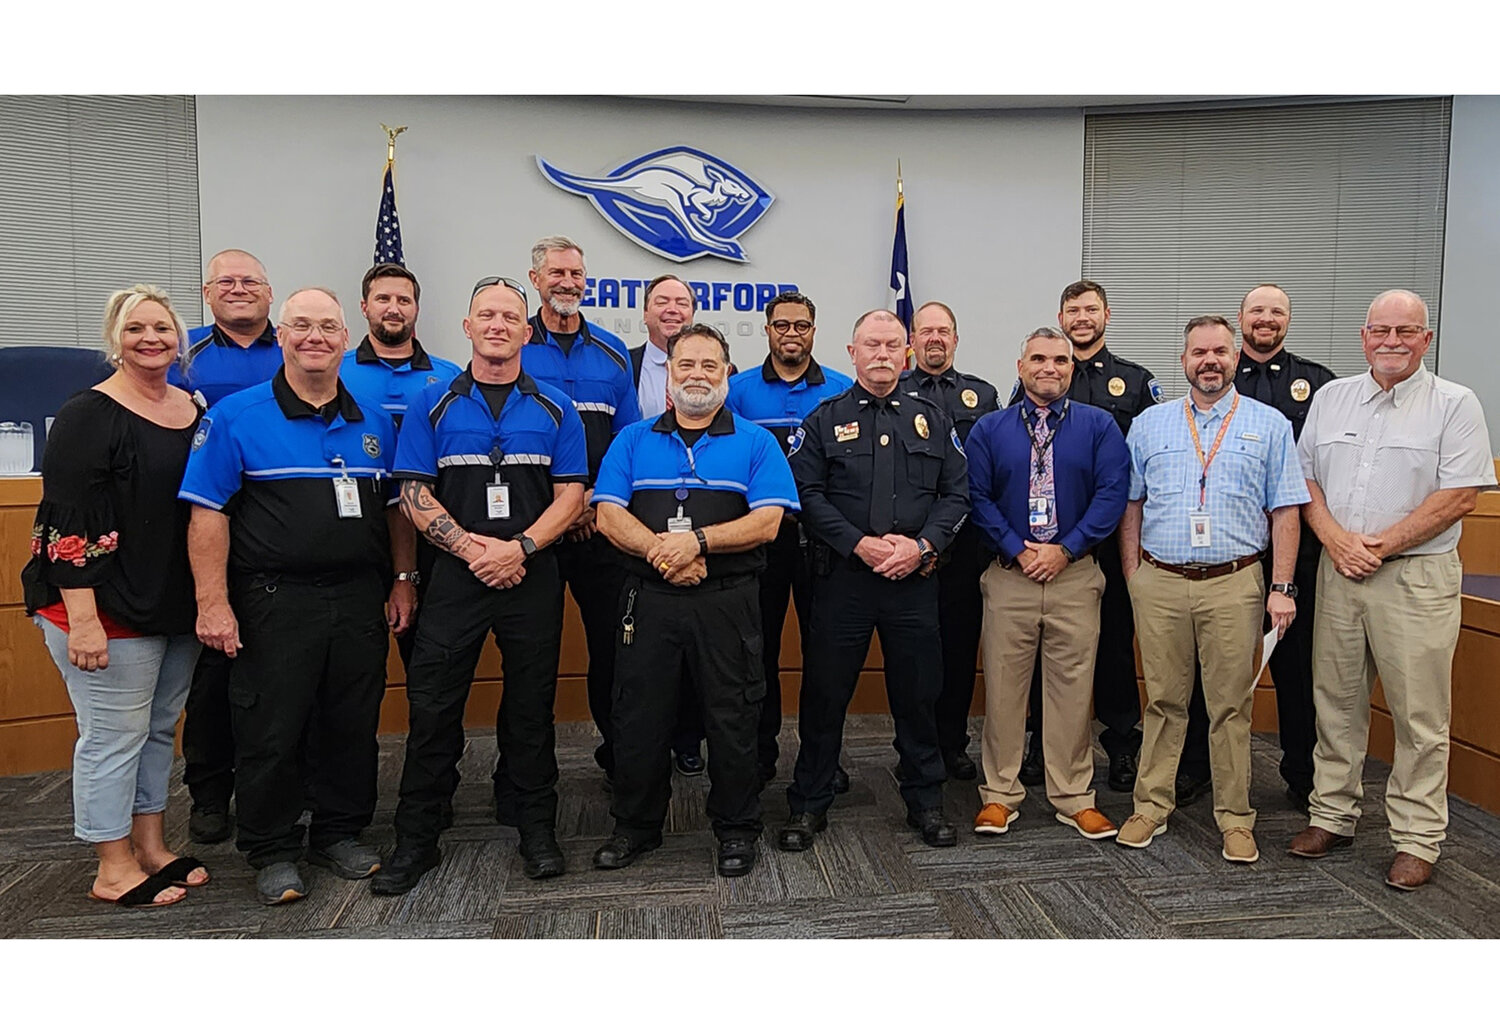 On the anniversary of 9/11, Weatherford ISD recognizes members of the district’s Community Service Officers, School Resource Officers, Weatherford Fire Department, Weatherford Police Department, and first responders.